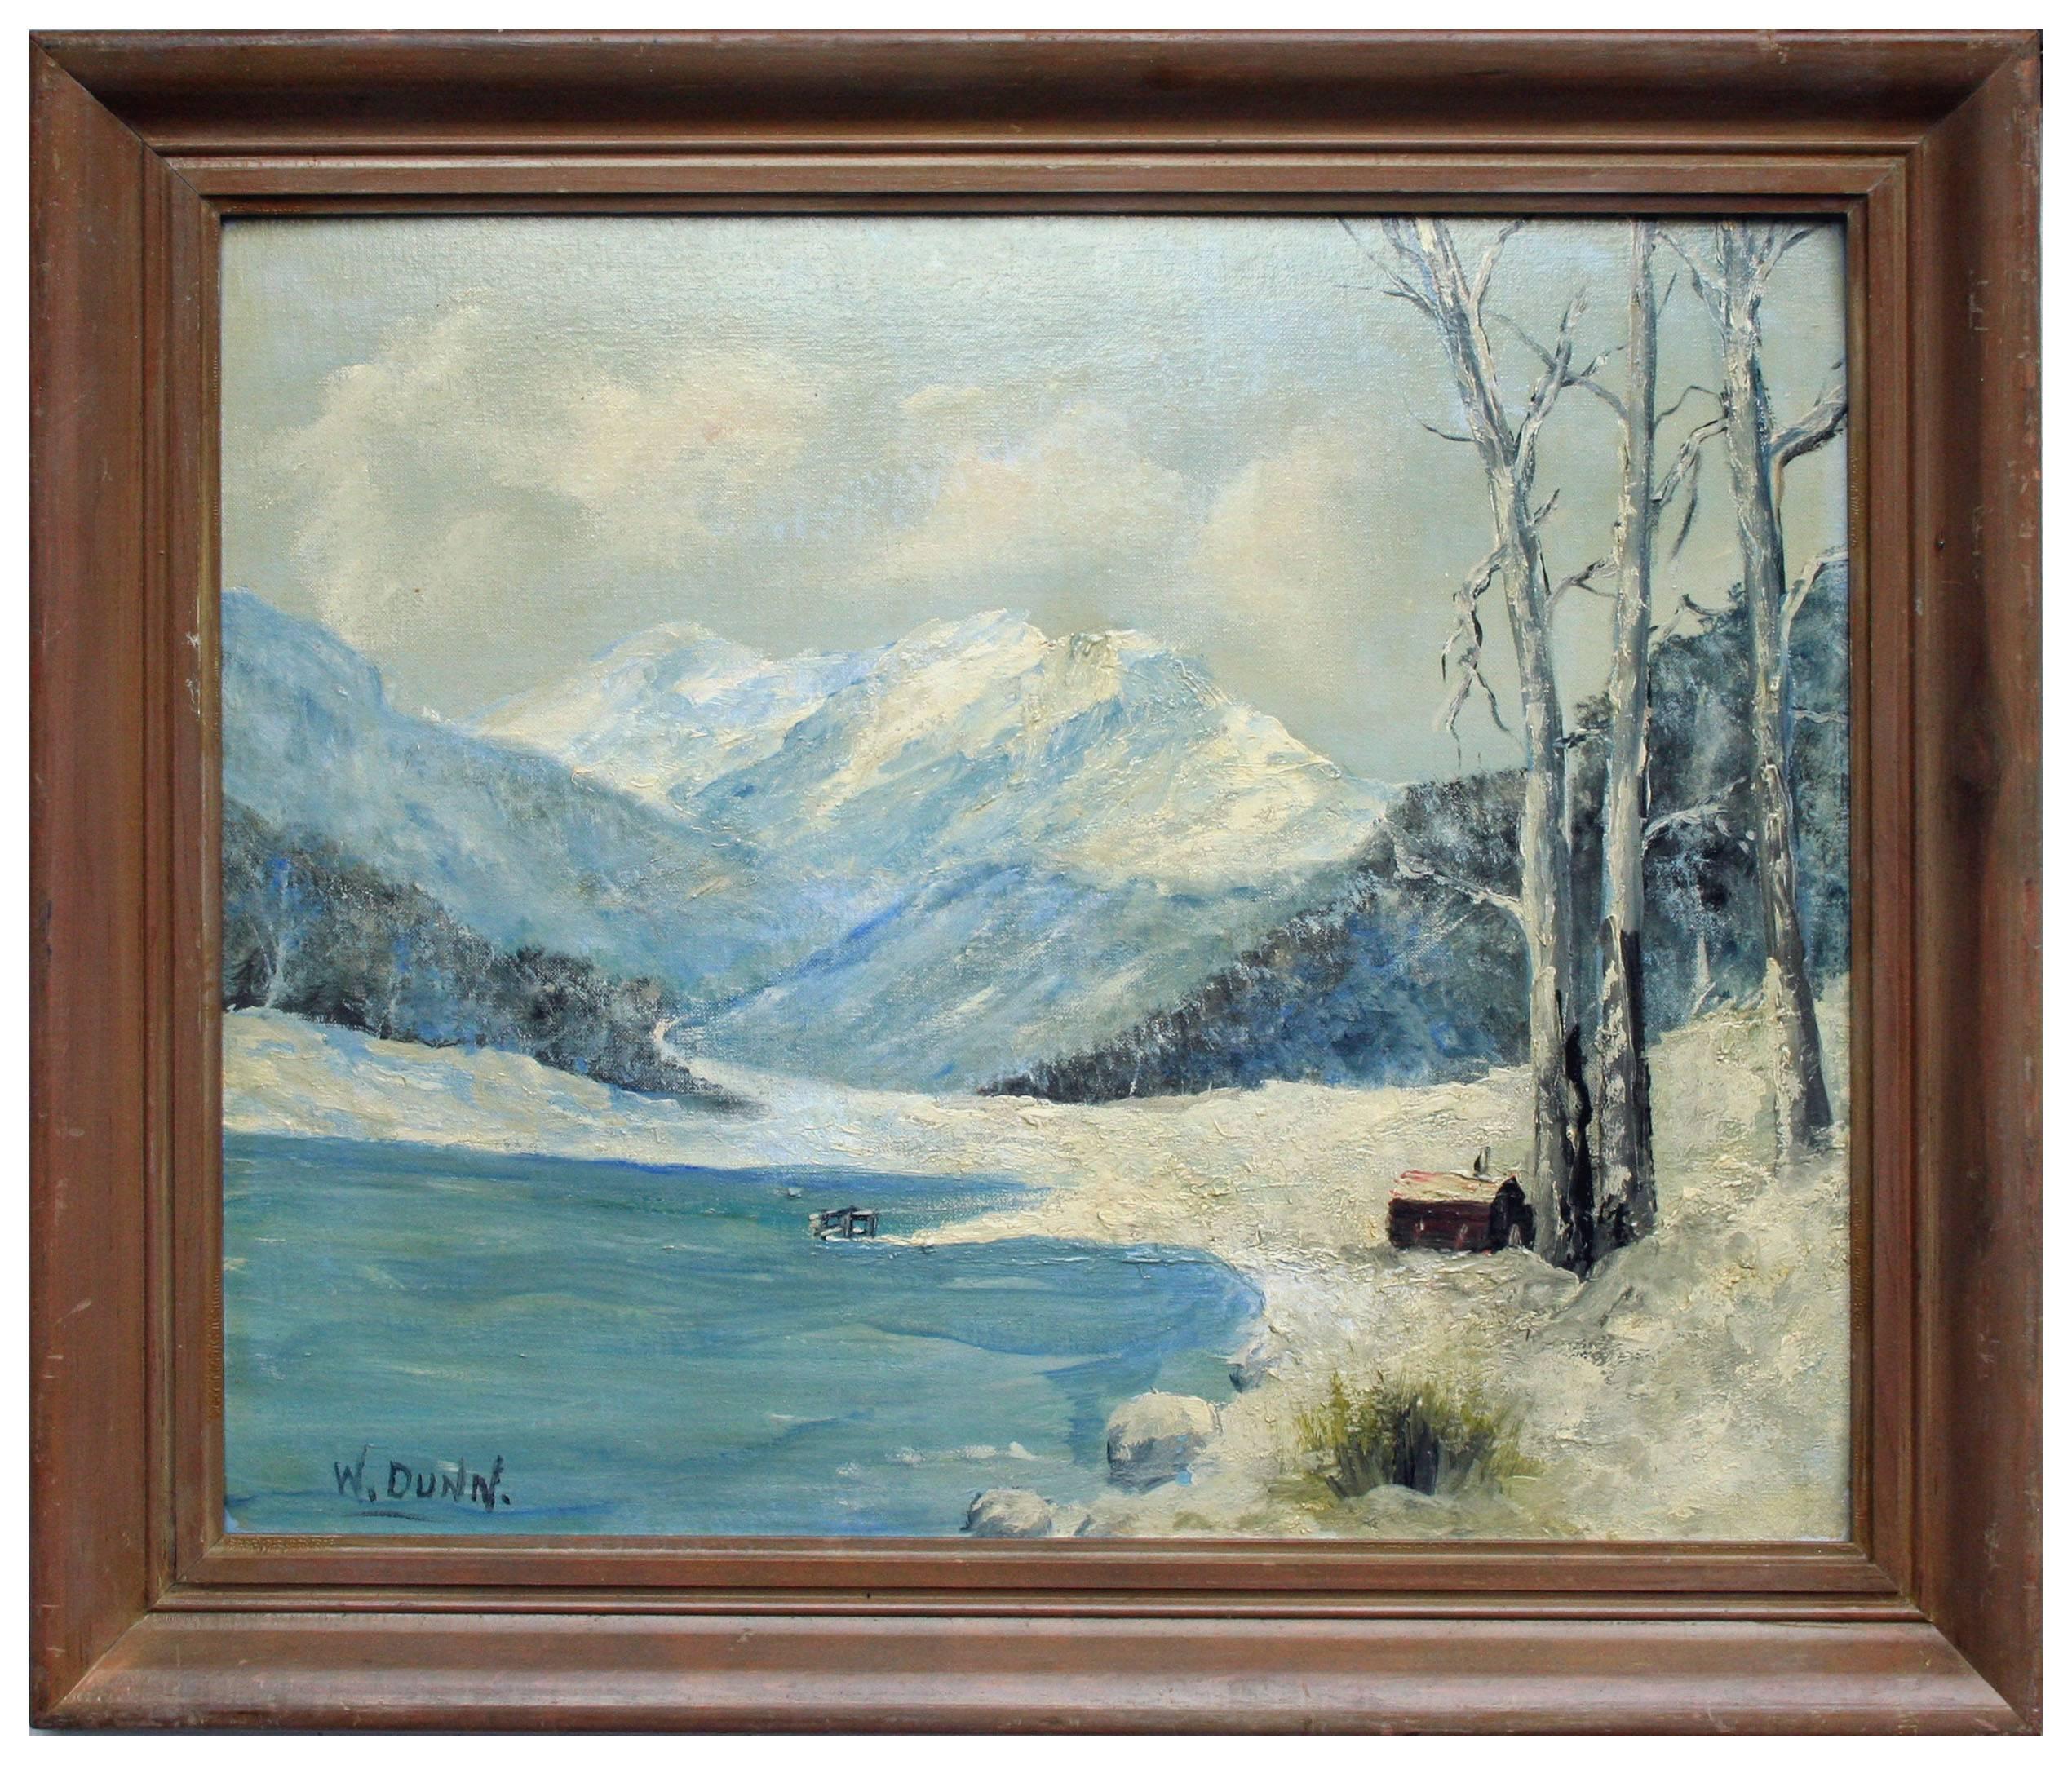 W. Dunn Landscape Painting - Mountain Lake Cabin in Snow, Mid-Century Winter Landscape